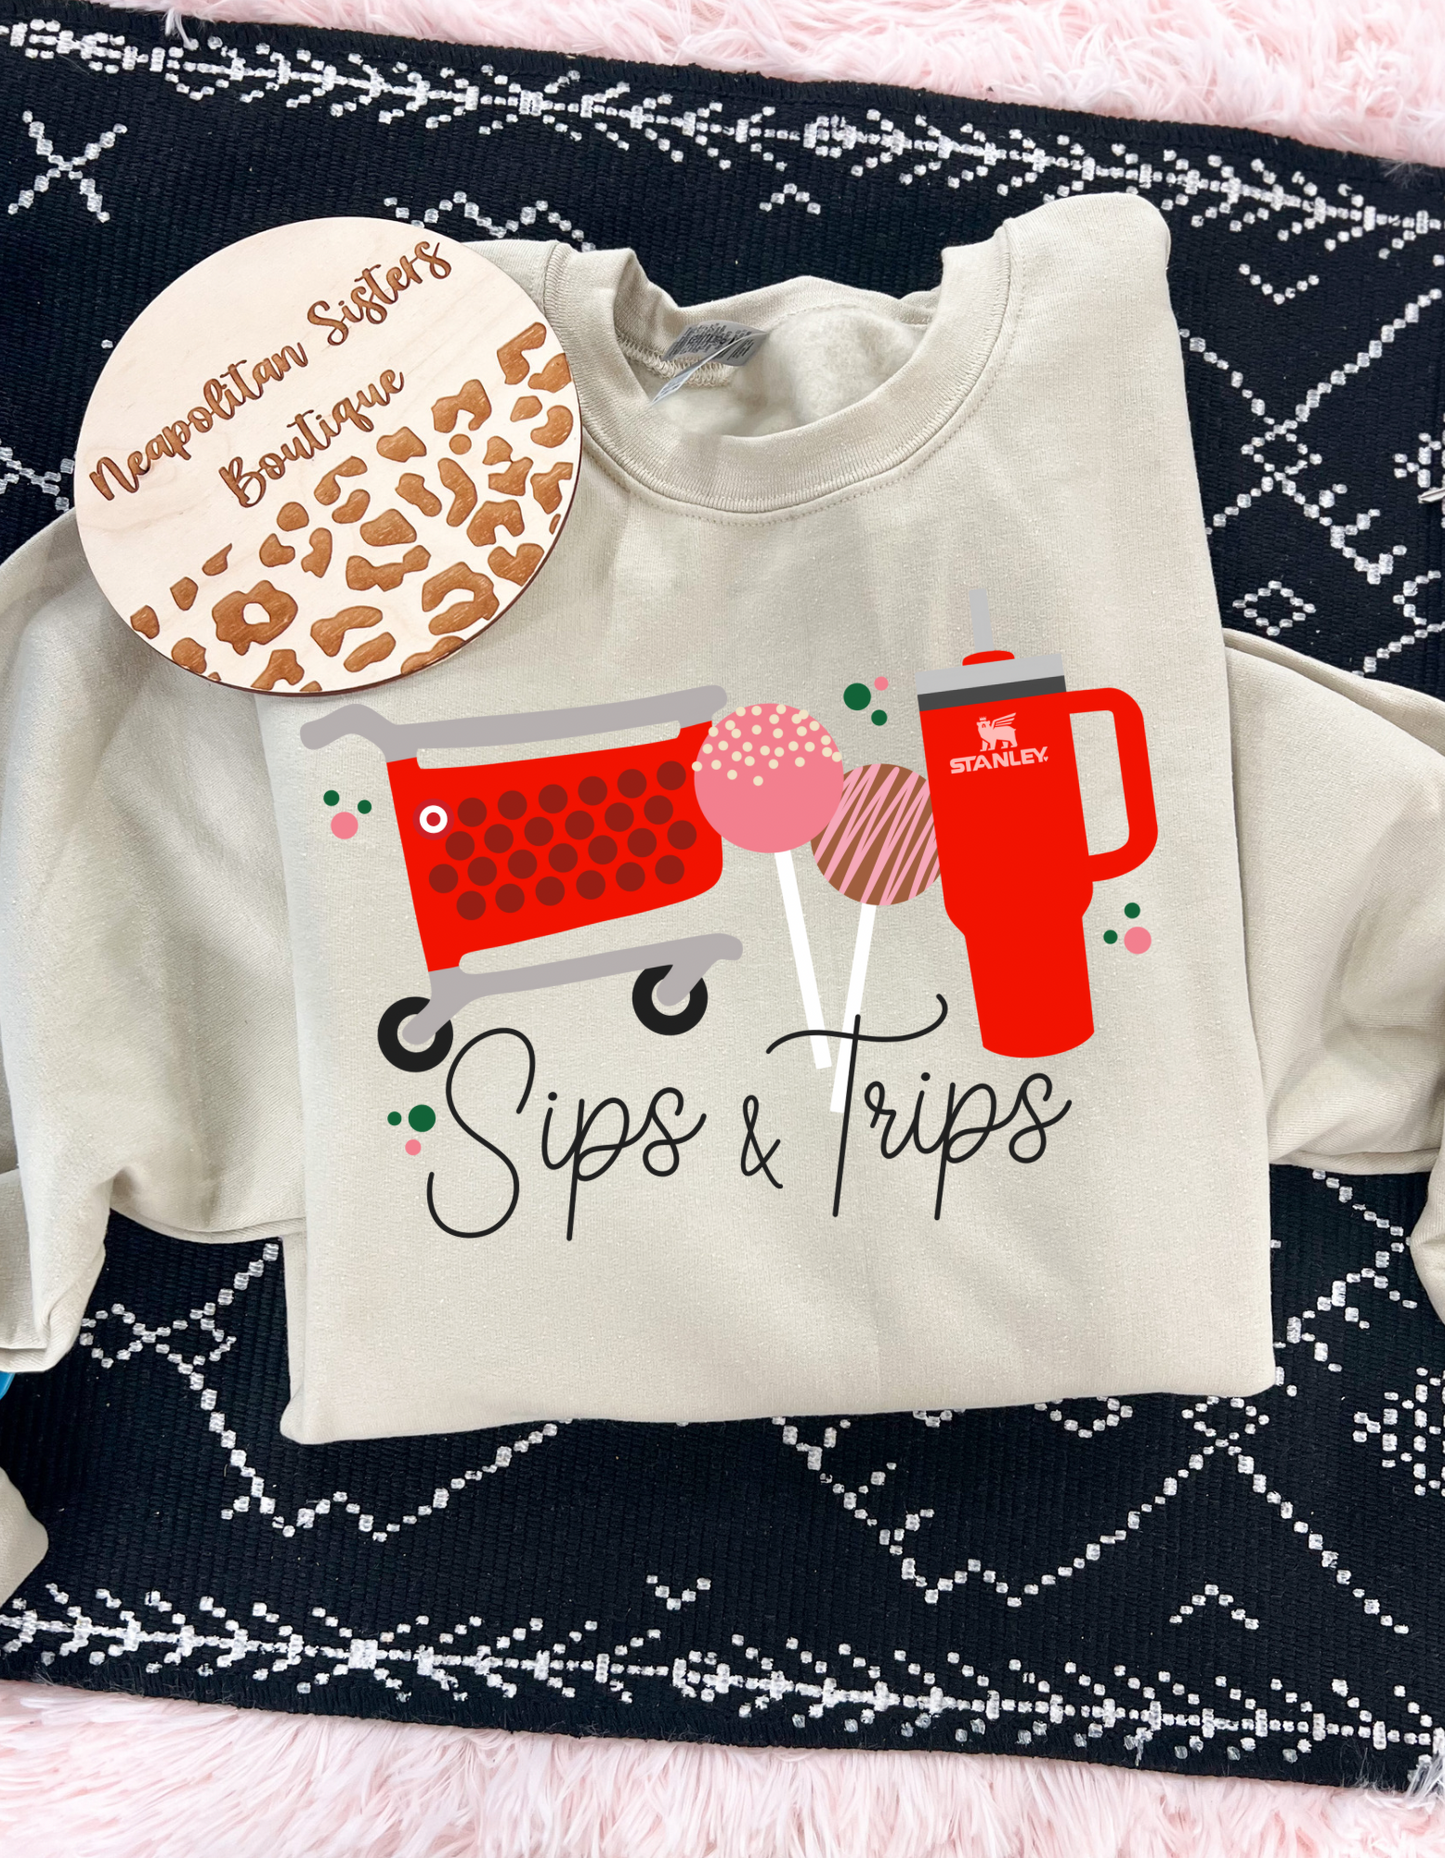 Sips and trips crewneck